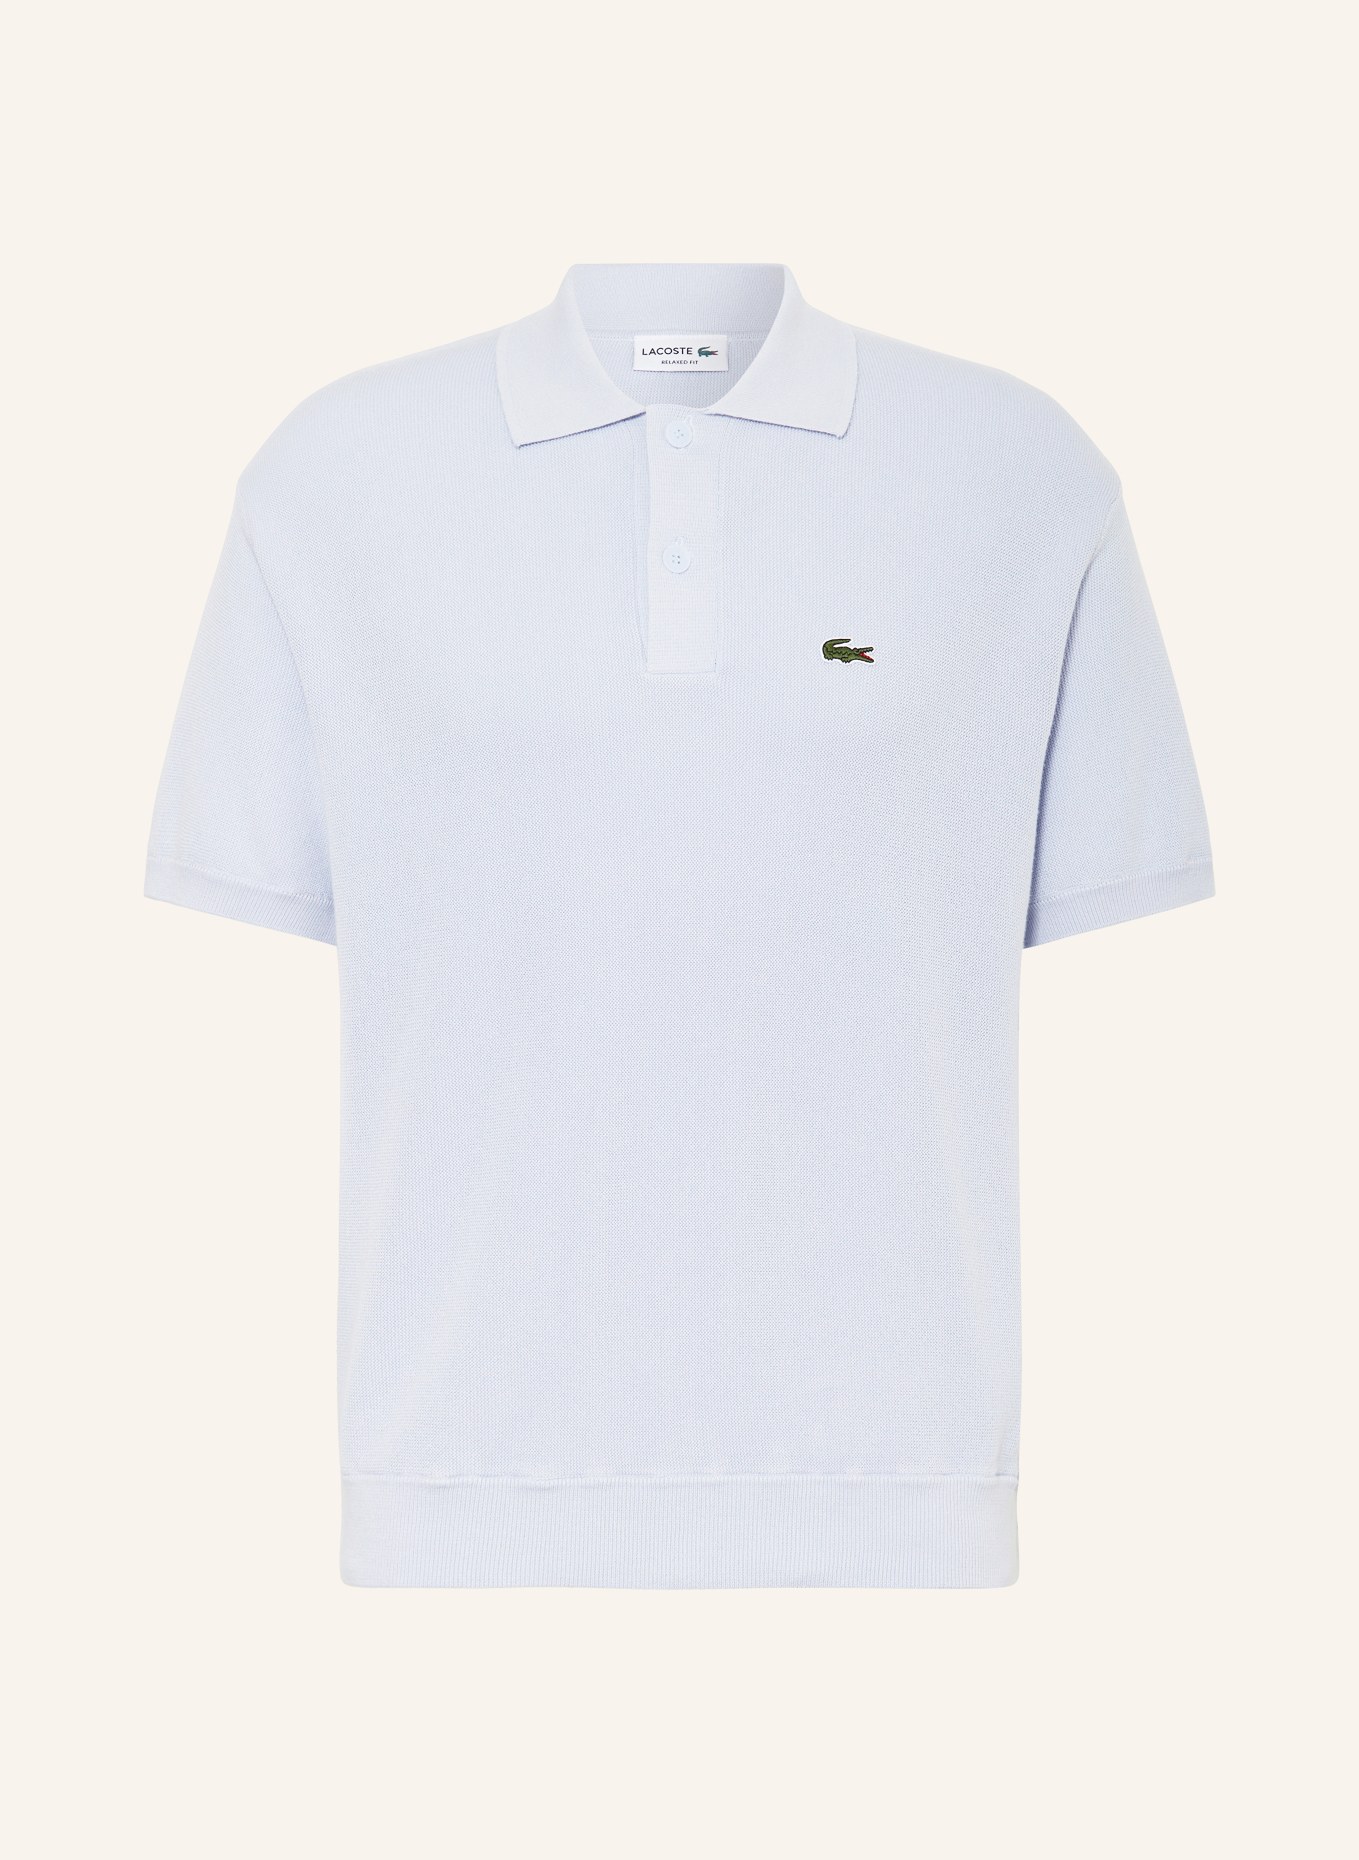 LACOSTE Strick-Poloshirt Relaxed Fit, Farbe: HELLBLAU (Bild 1)